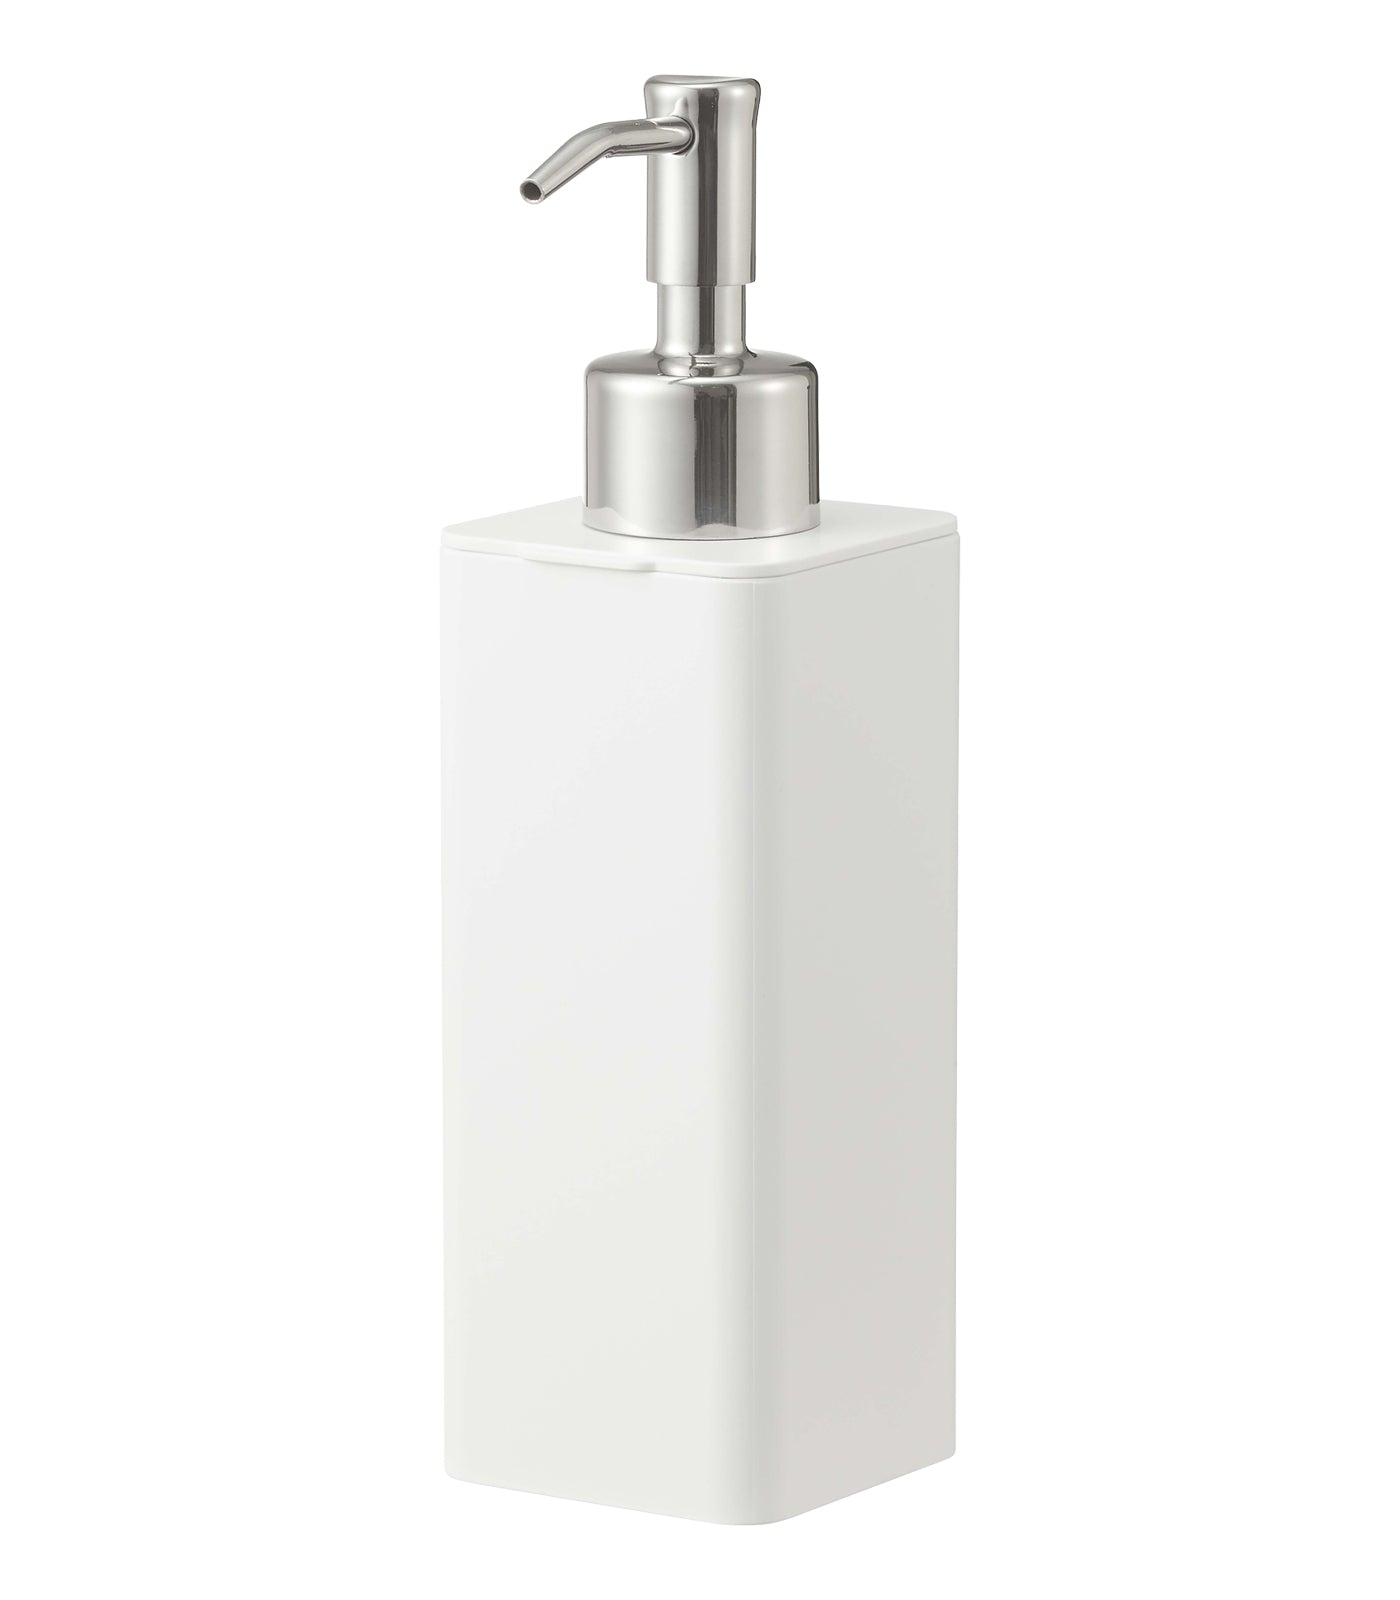 Traceless Adhesive Soap Dispenser on a blank background.